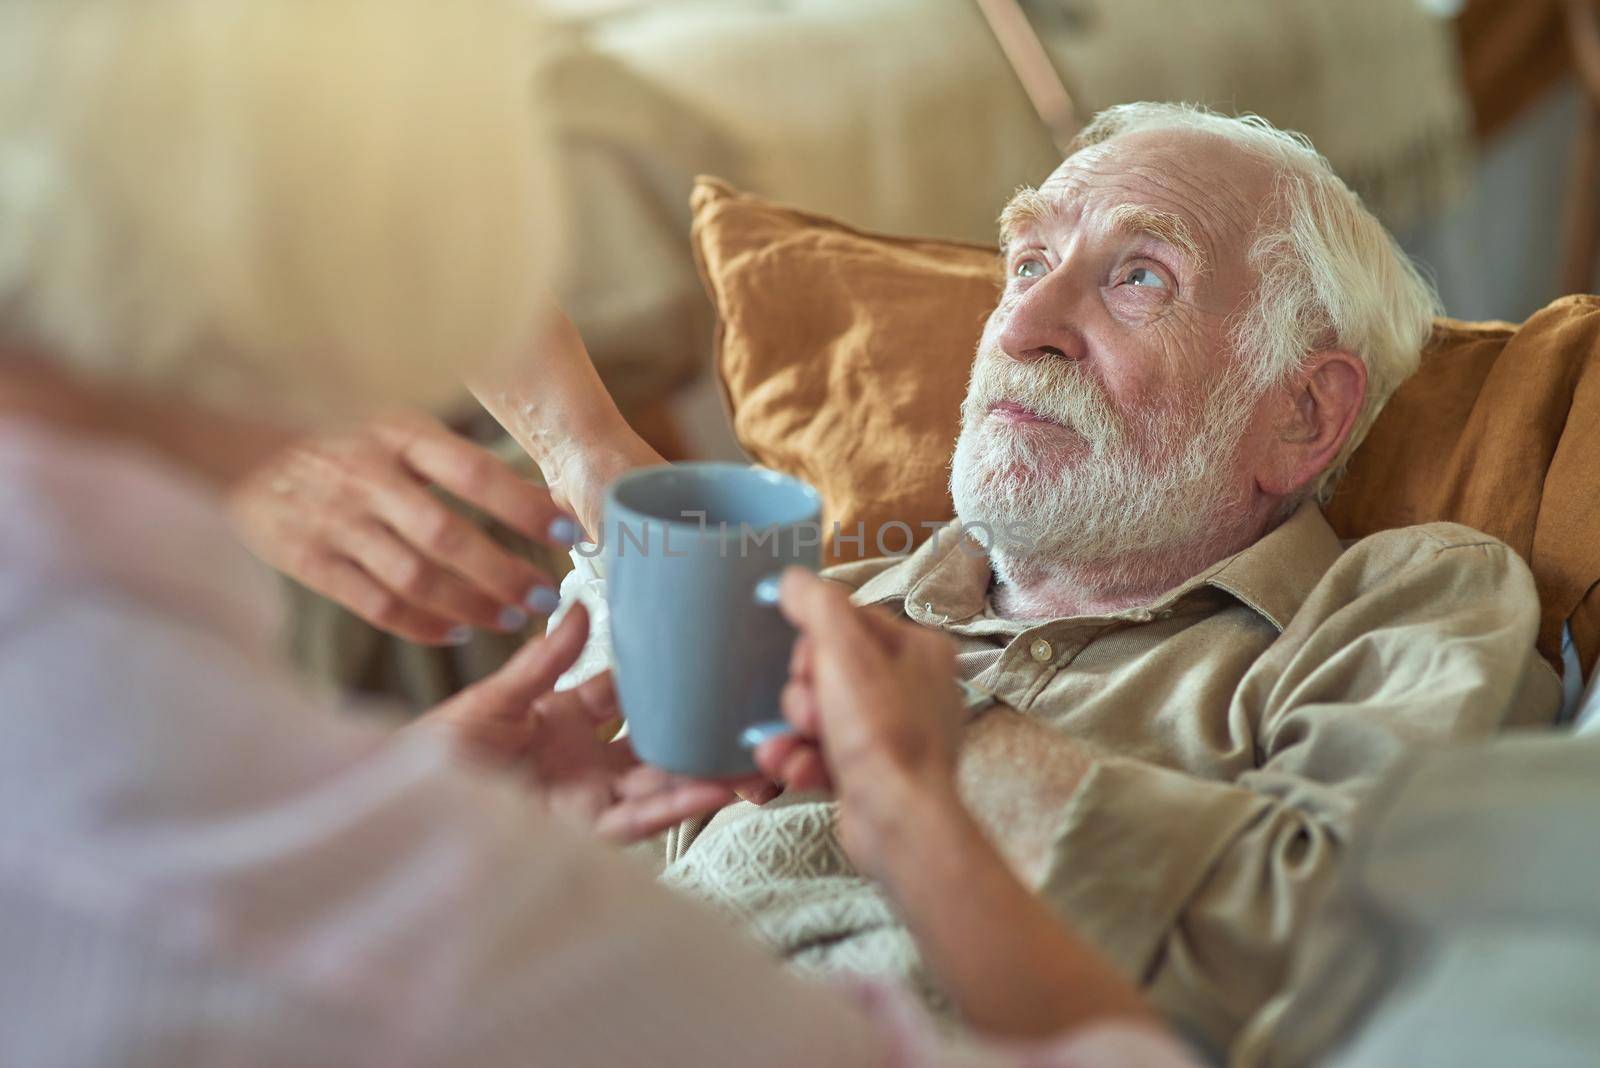 Elderly gray-haired man sick at home while his wife caring for him and holding hot drink for him. Care and health concept